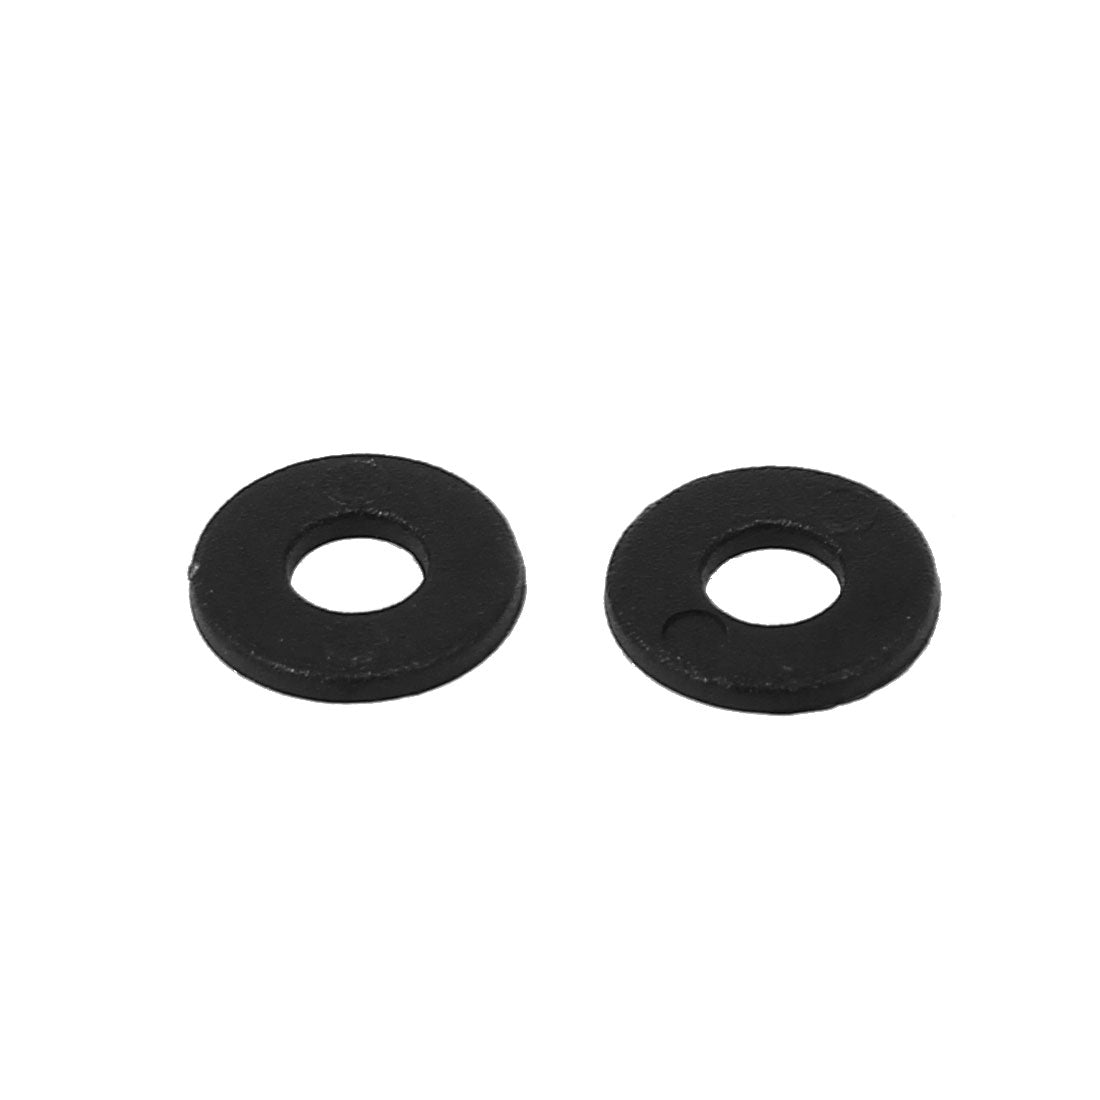 uxcell Uxcell M4x10mmx1mm Plastic Round Flat Washer Gasket Spacer Seal Ring Black 200pcs